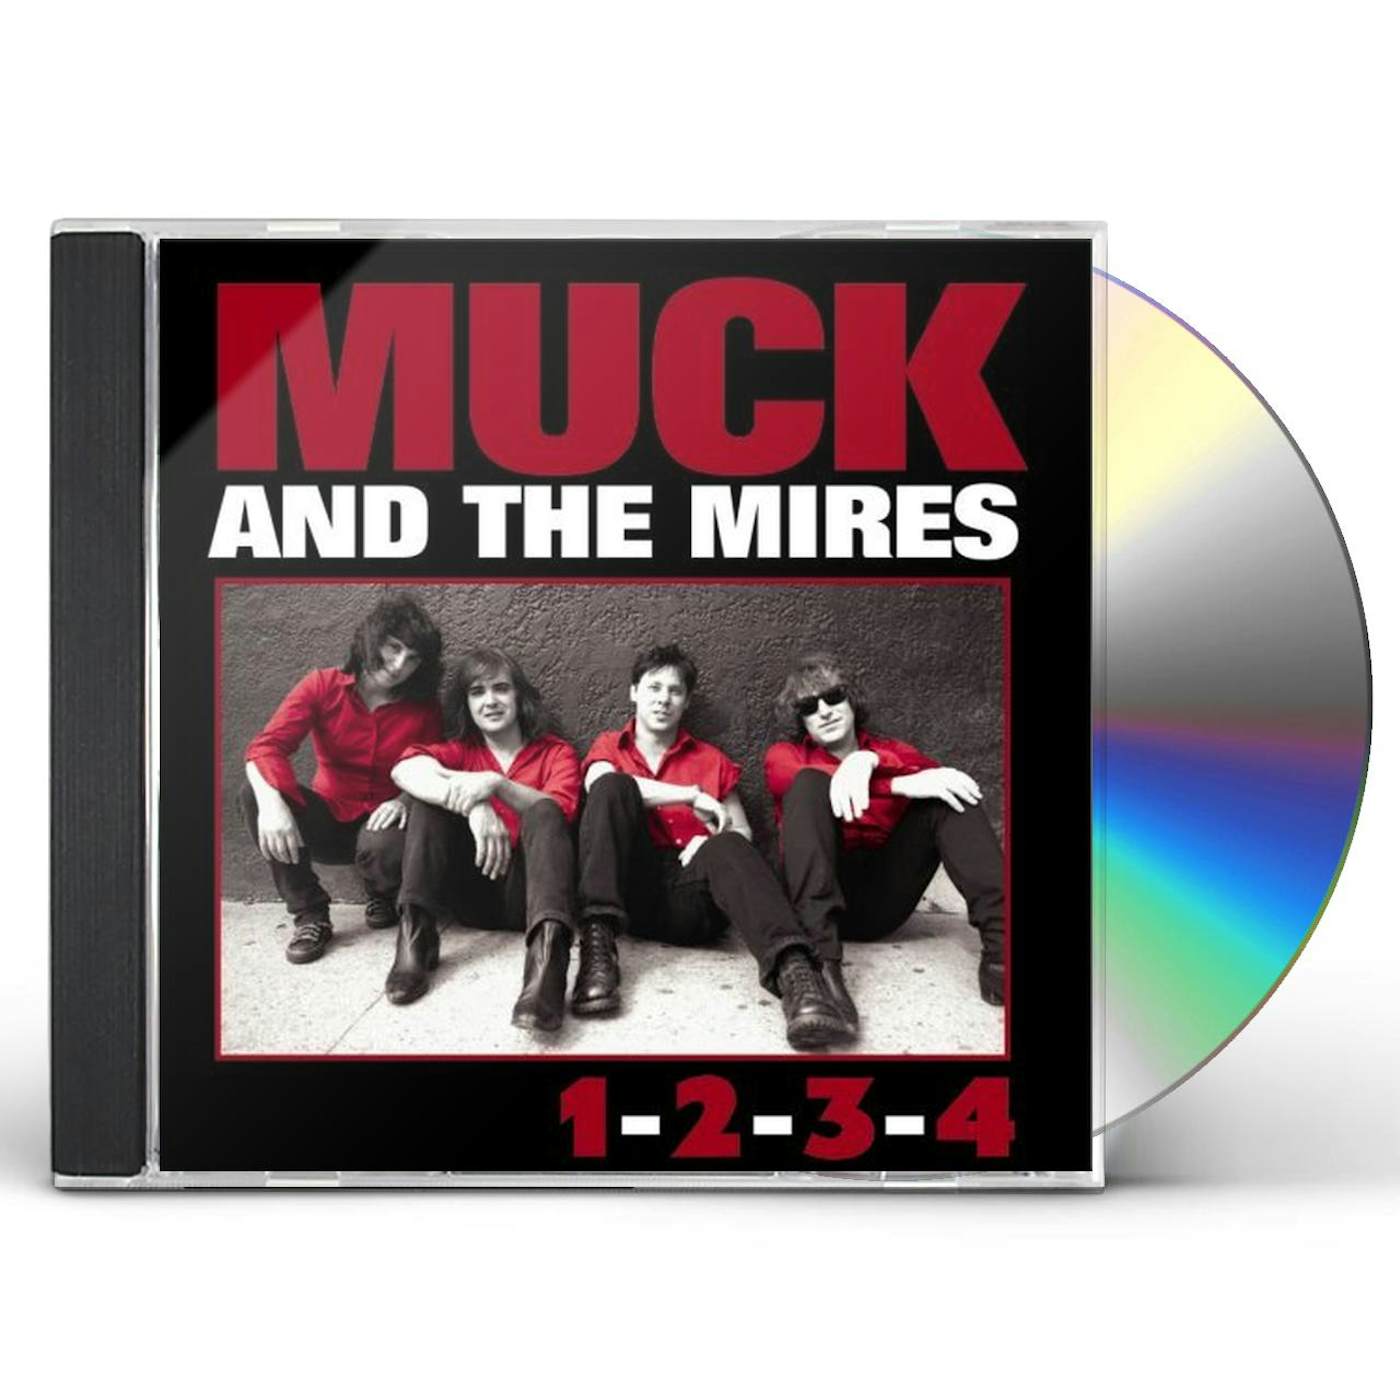 Muck & The Mires 1-2-3-4 CD